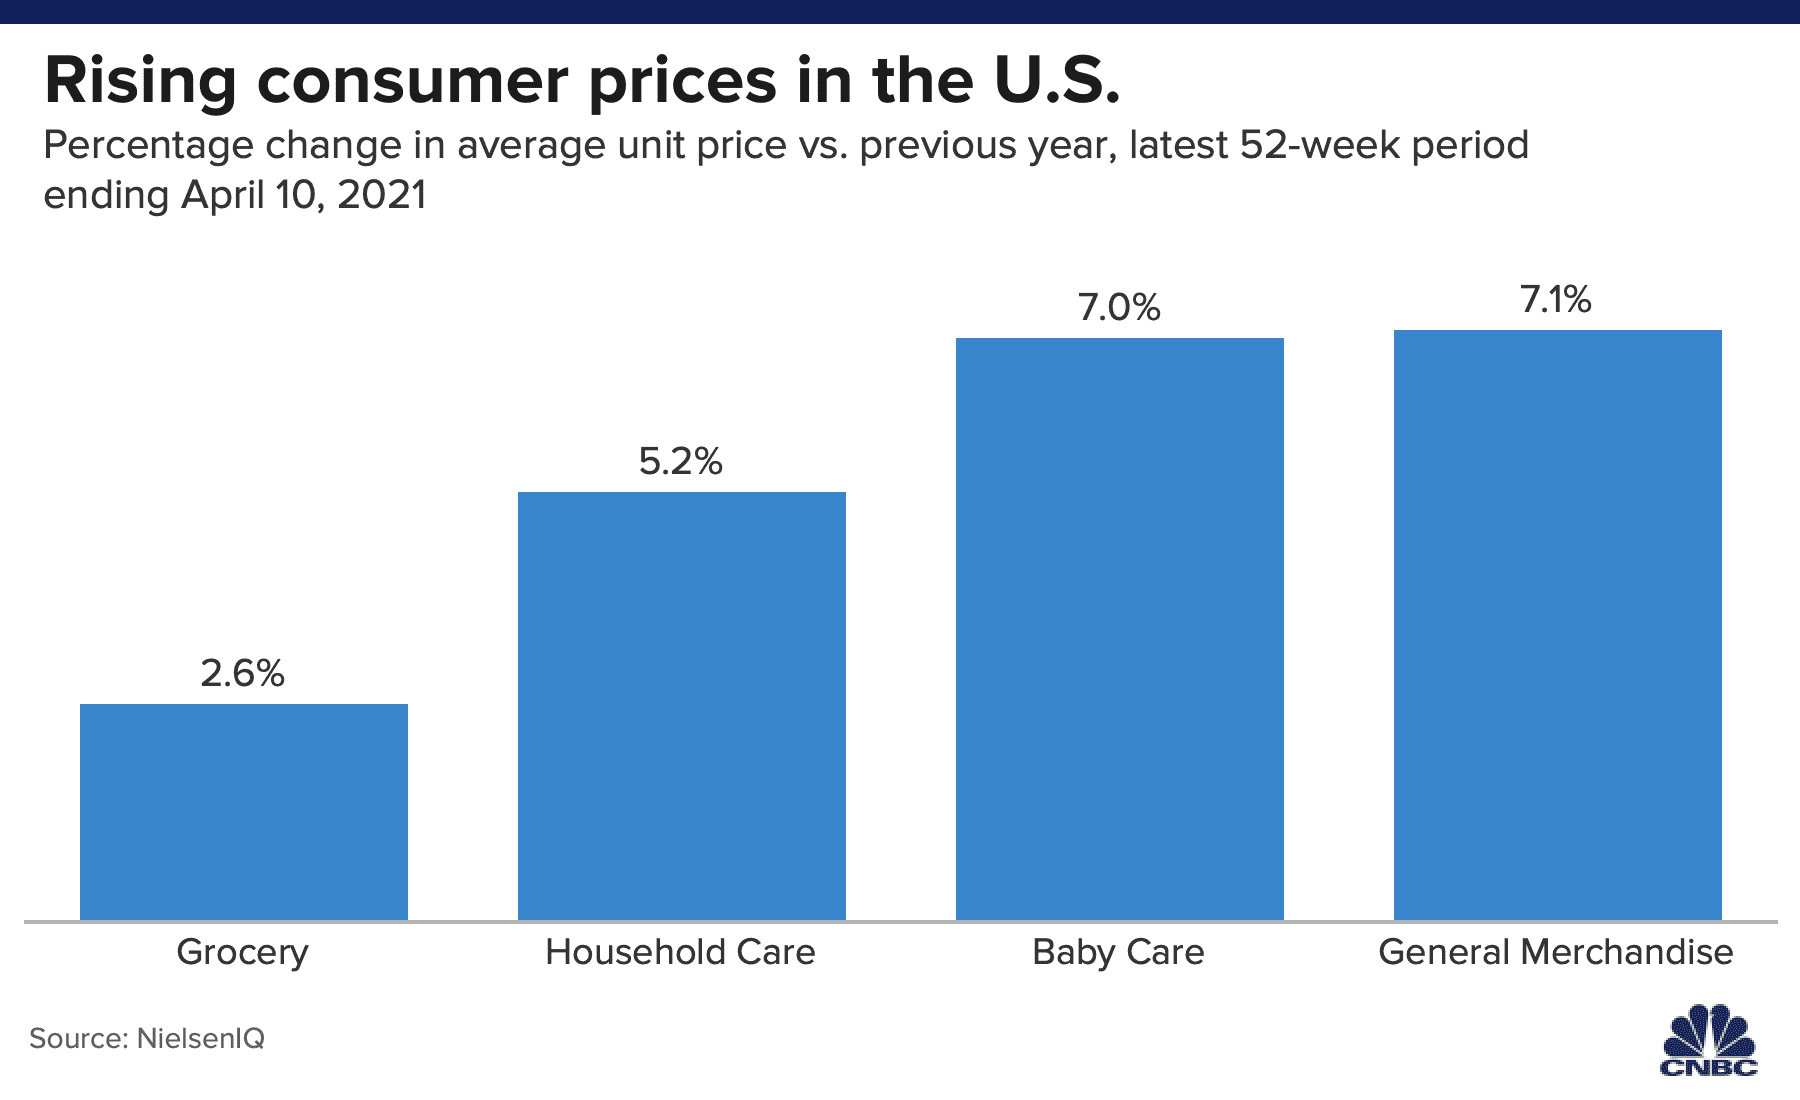 Attention shoppers: Price hikes are ahead, but consumer companies hope you won't notice